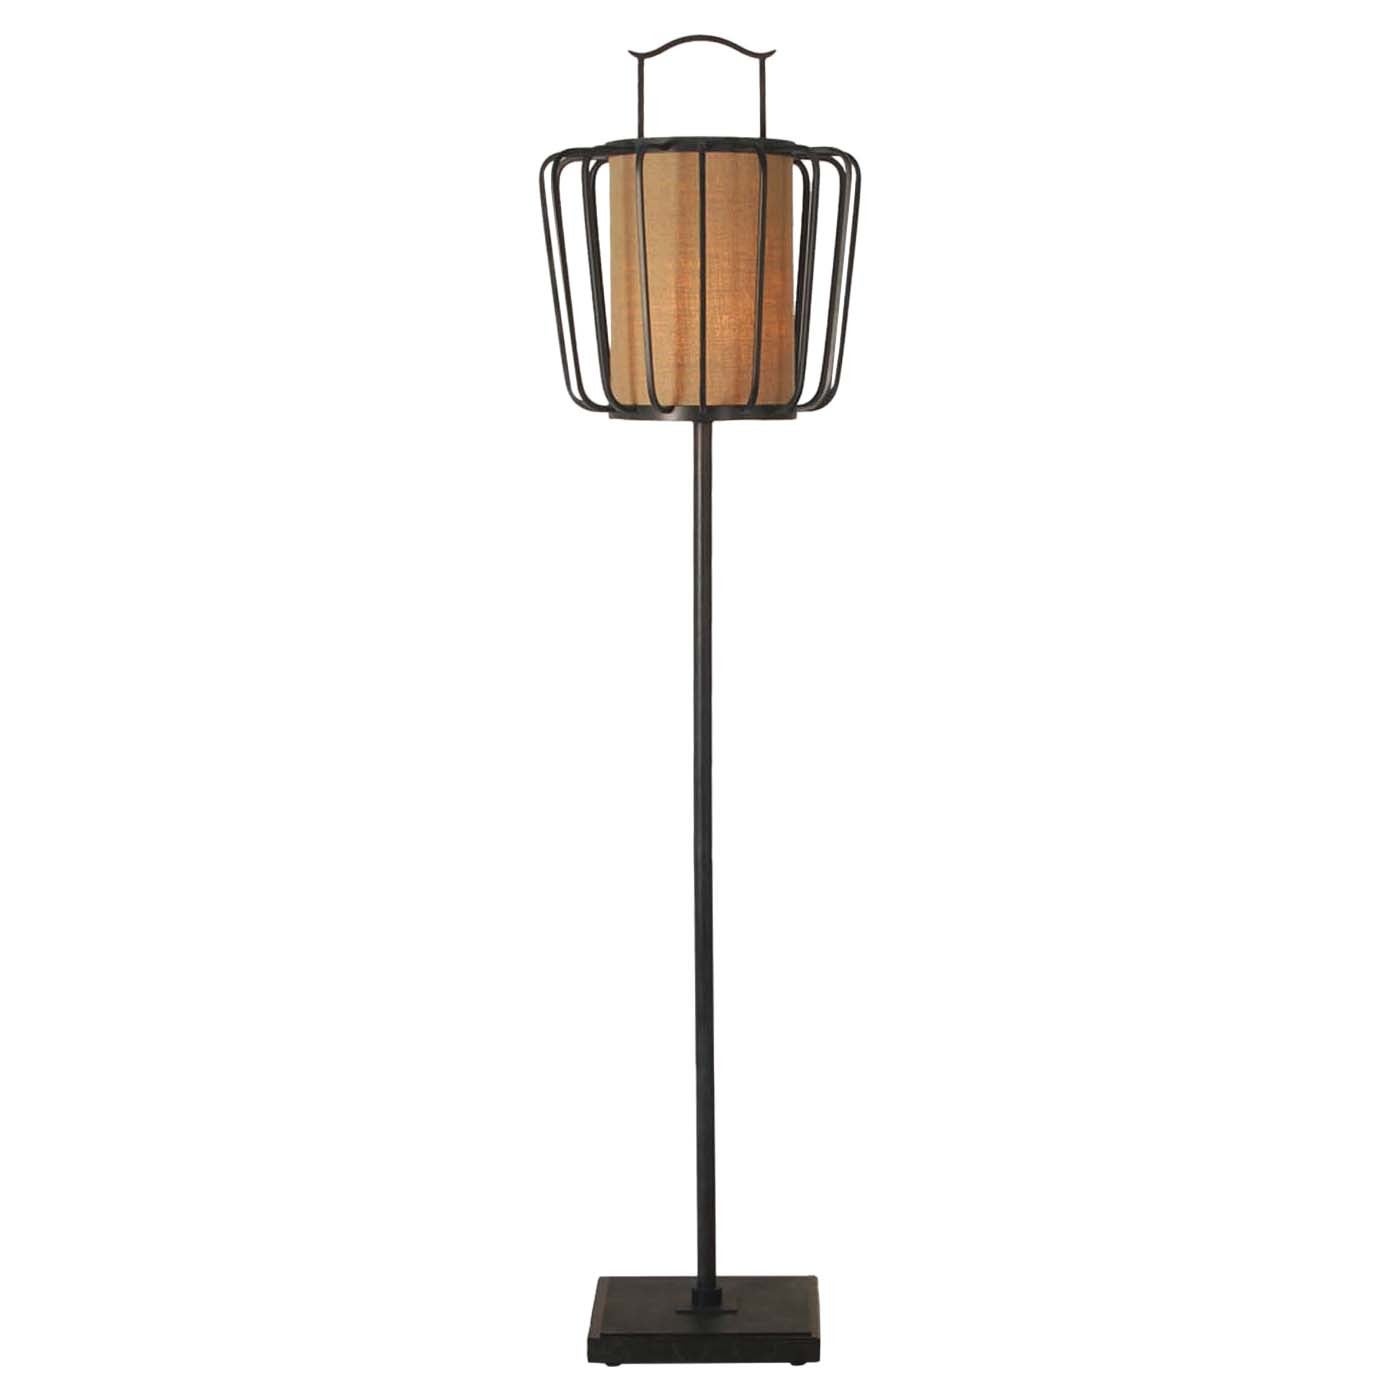 Ming Alter Floor Lamp For Sale